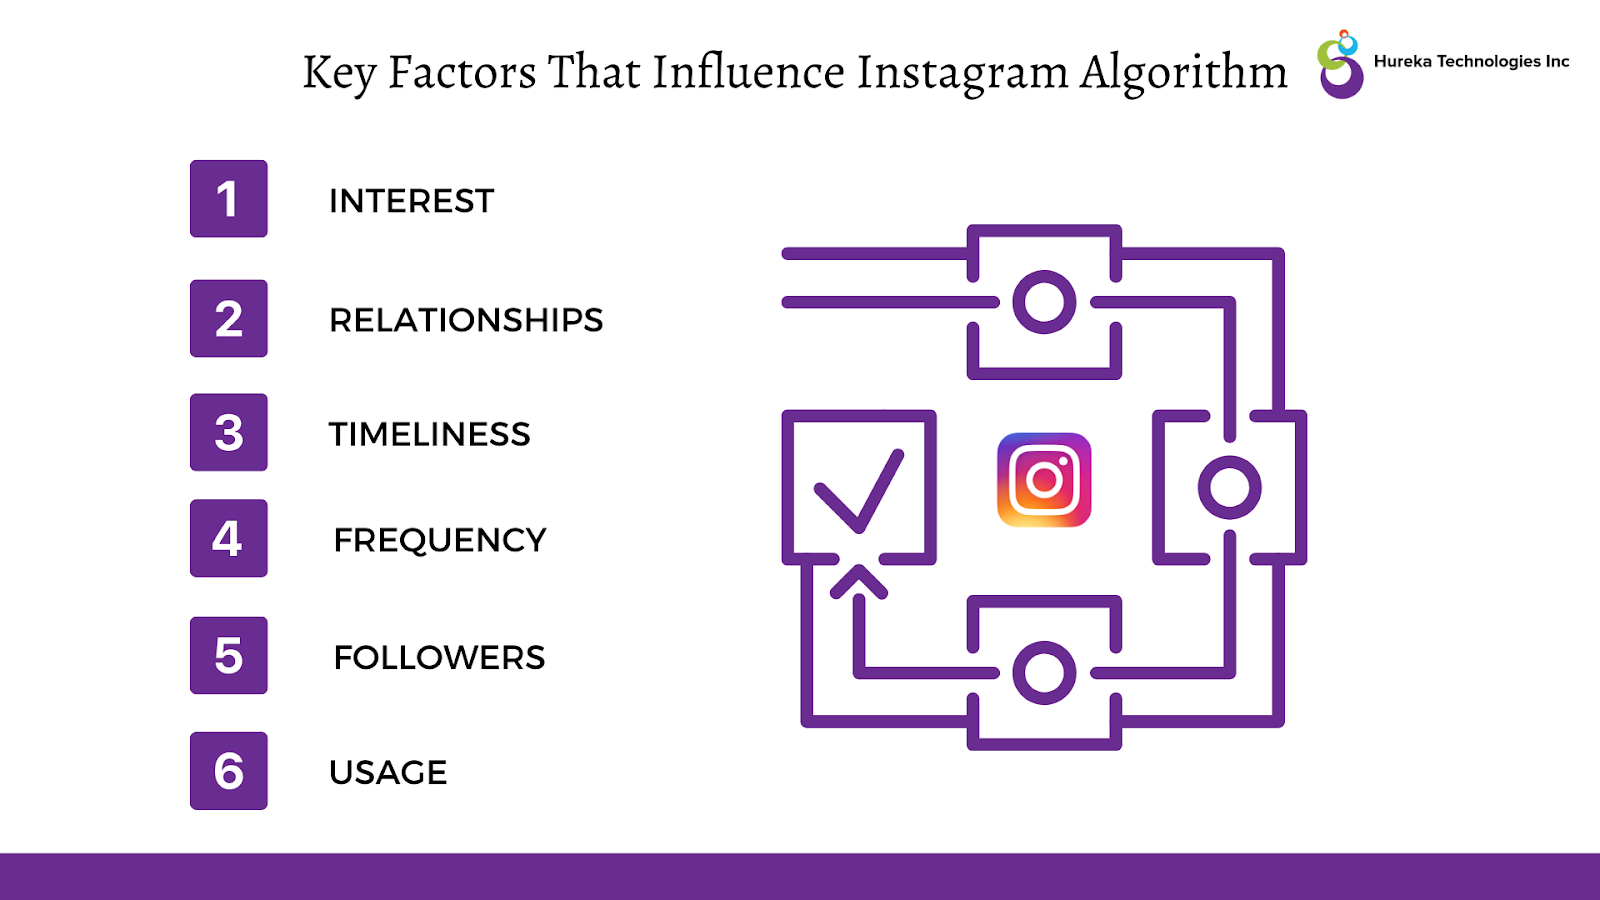 Infographic showing 6 key factors that influence the Instagram algorithm